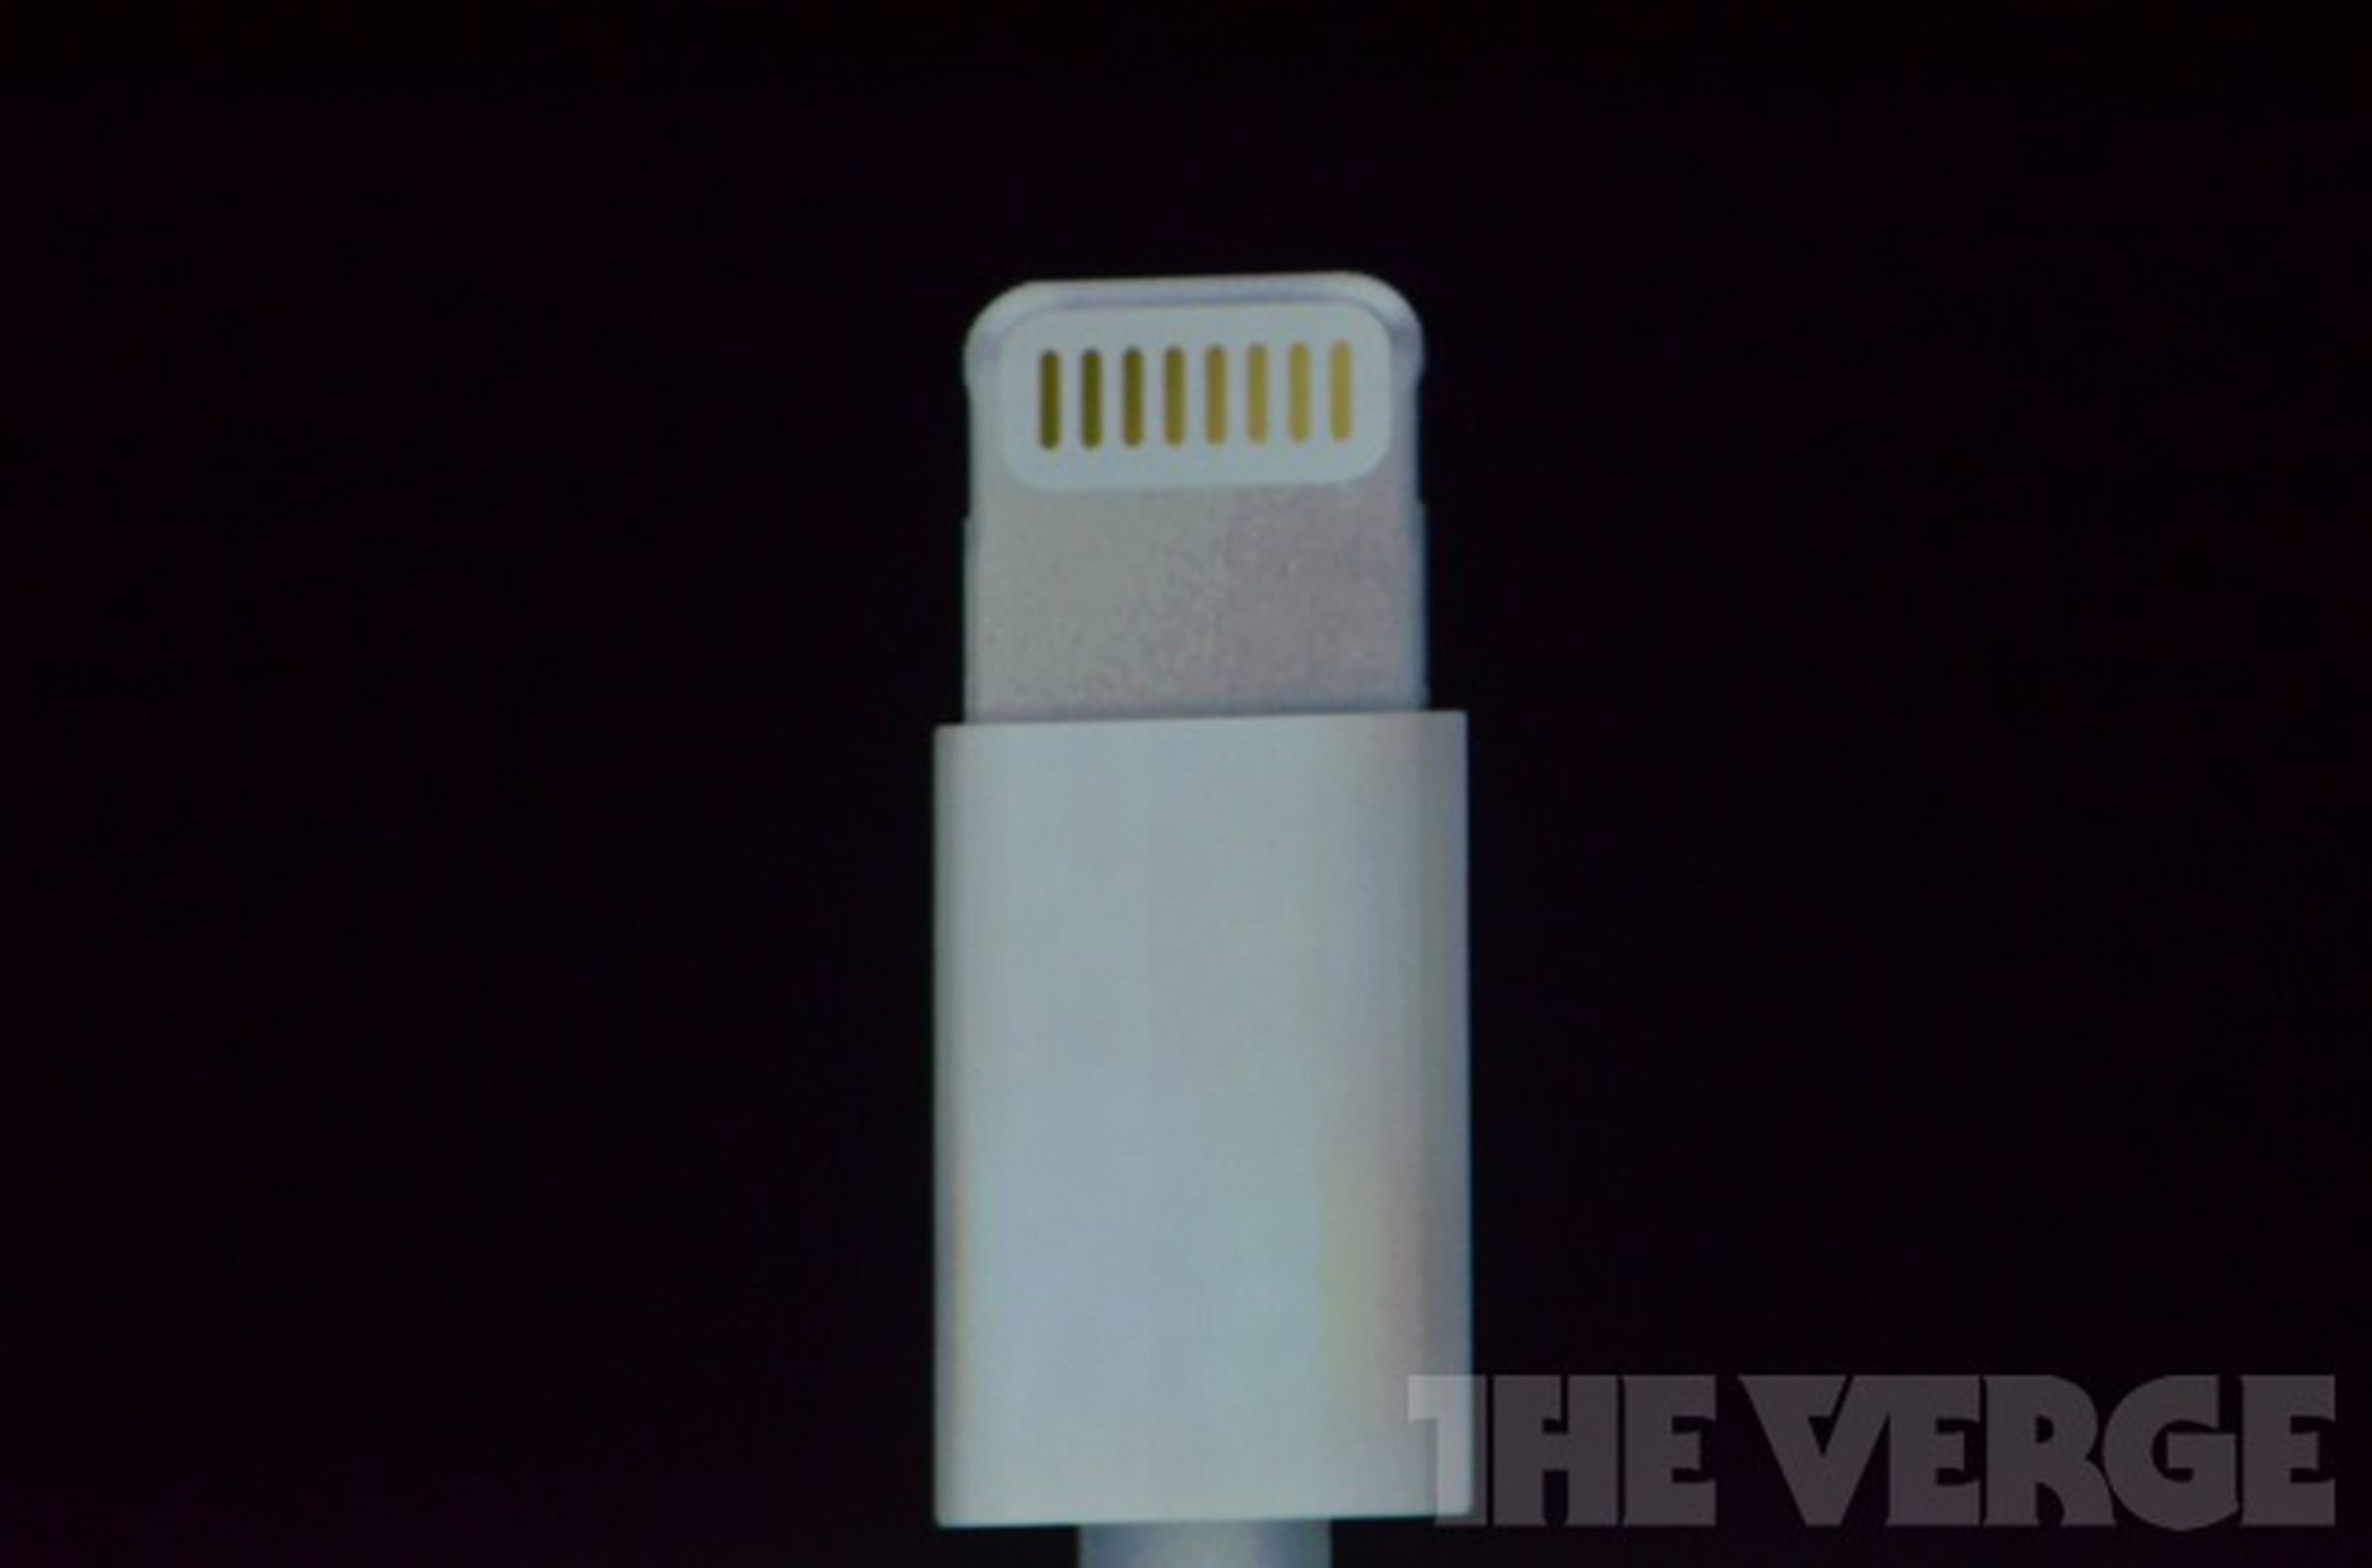 Liveblog images of Lightning, Apple's new iPhone 5 connector